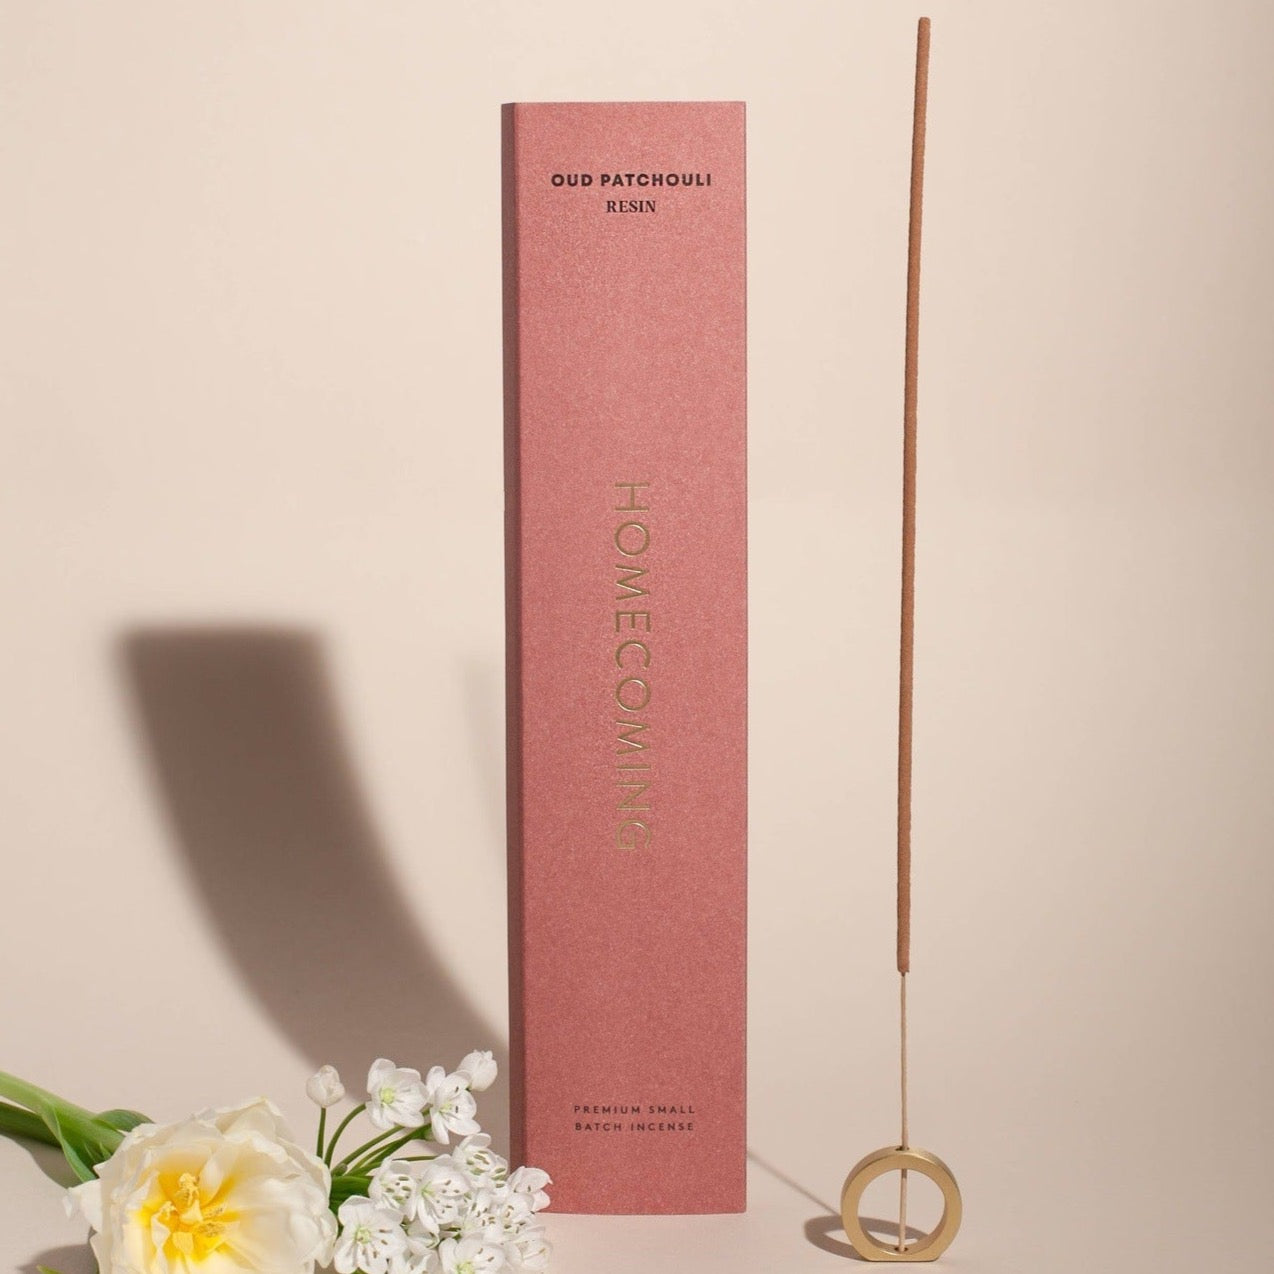 Oud Patchouli Resin Incense Candles + Incense